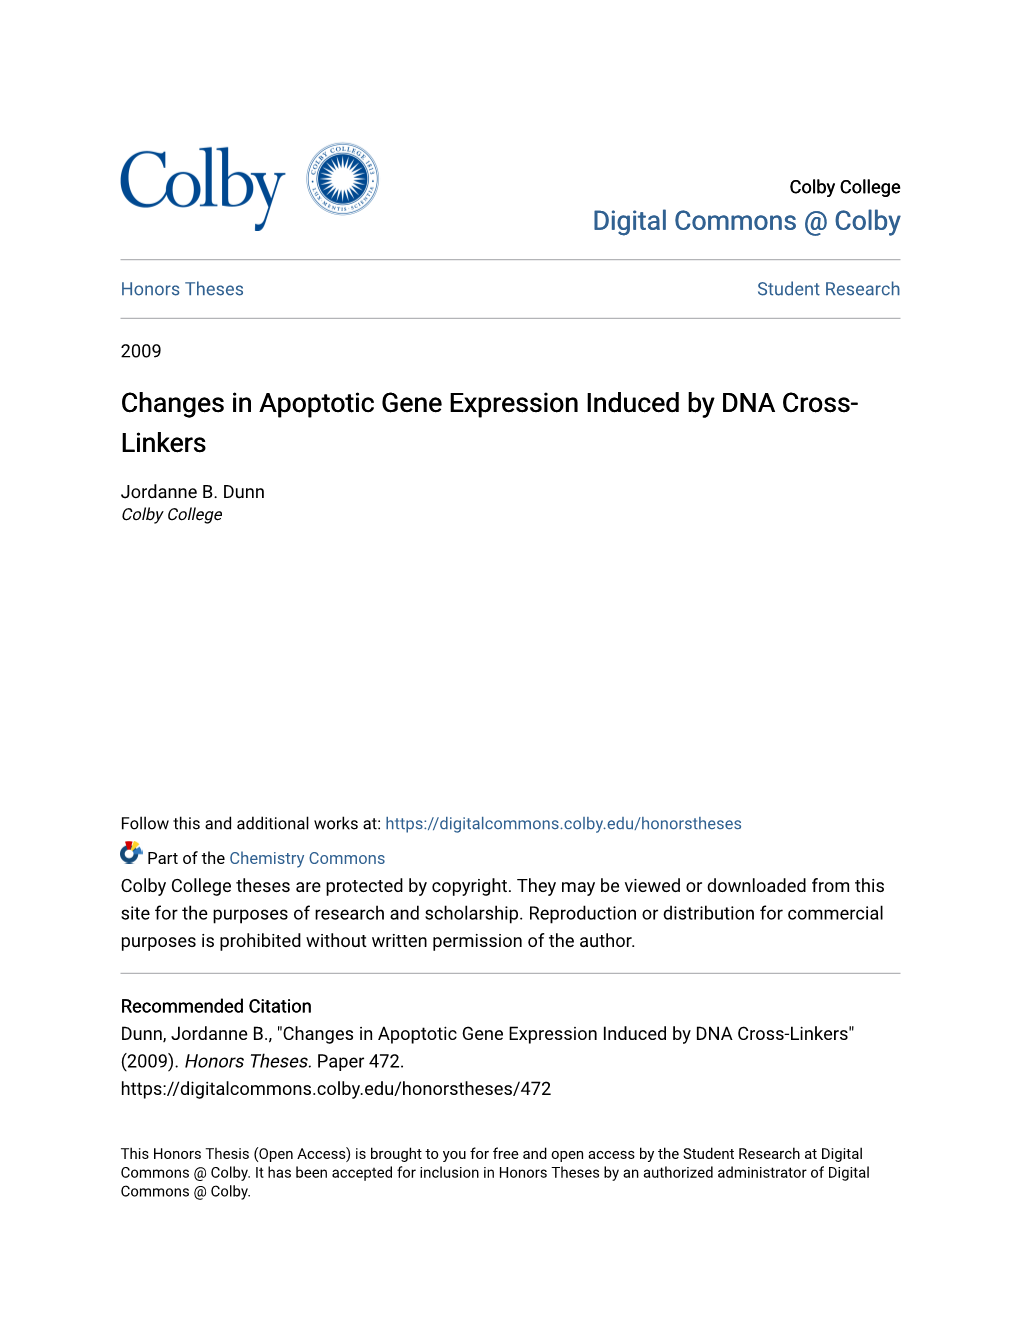 Changes in Apoptotic Gene Expression Induced by DNA Cross- Linkers